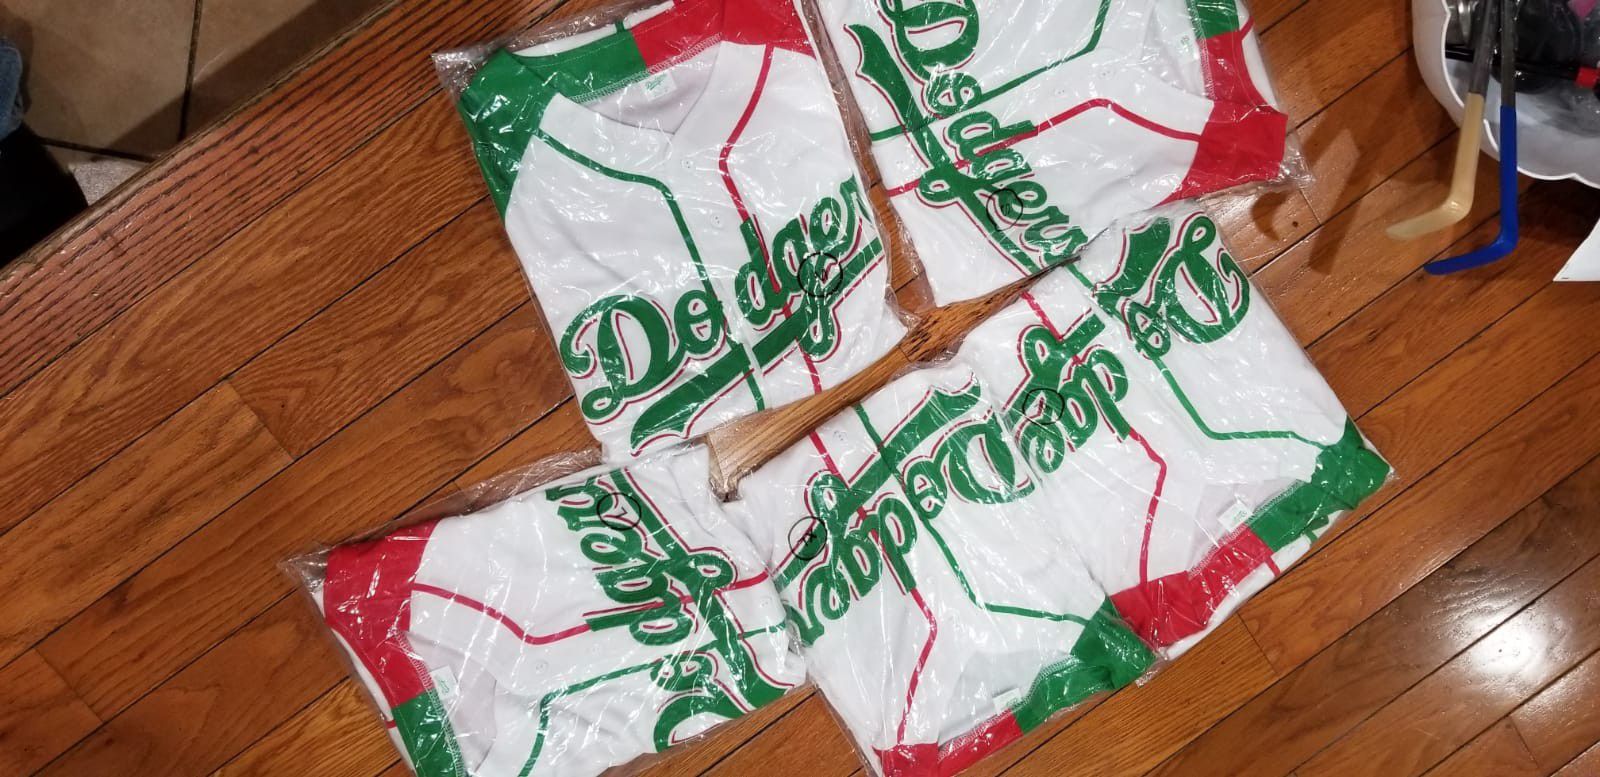 Los Angeles Dodgers Mexican flag 3x5’ for Sale in La Mirada, CA - OfferUp